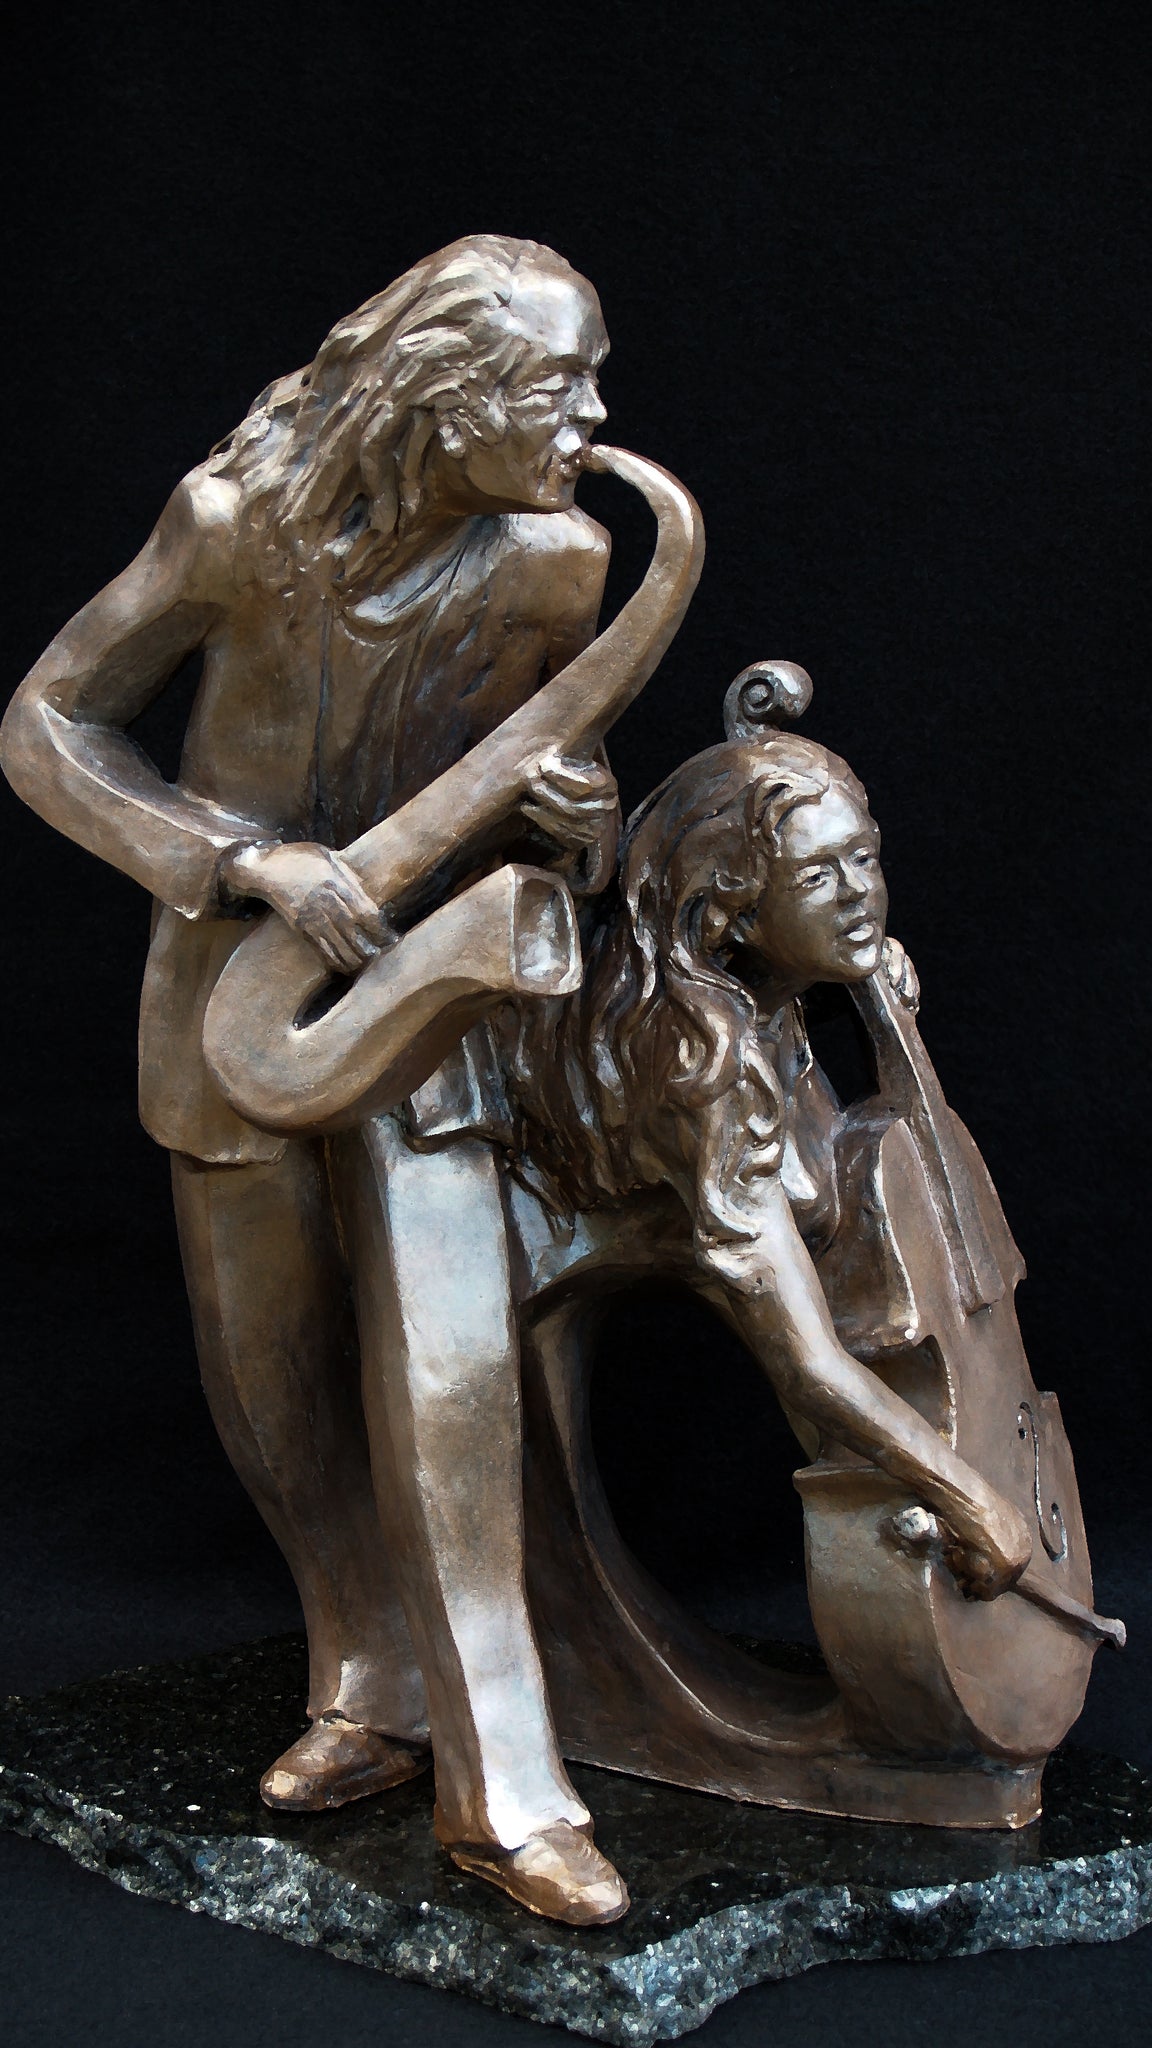 Taking Notes From Dad | Father & Daughter | Create Musical Harmony  |  Stoneware Sculpture | Musicians | Jazz | Blues | Rhythm & Blues Players | Harmonizing in Blues | Blues Musicians | Smooth Sax Solo| Rhythmic Bass Line | by Headley Sculptures | Wayne Headley | Bronze Limited Edition | Resin | Black Art | Blues | Jazz | R&B | Soul | Inspiration